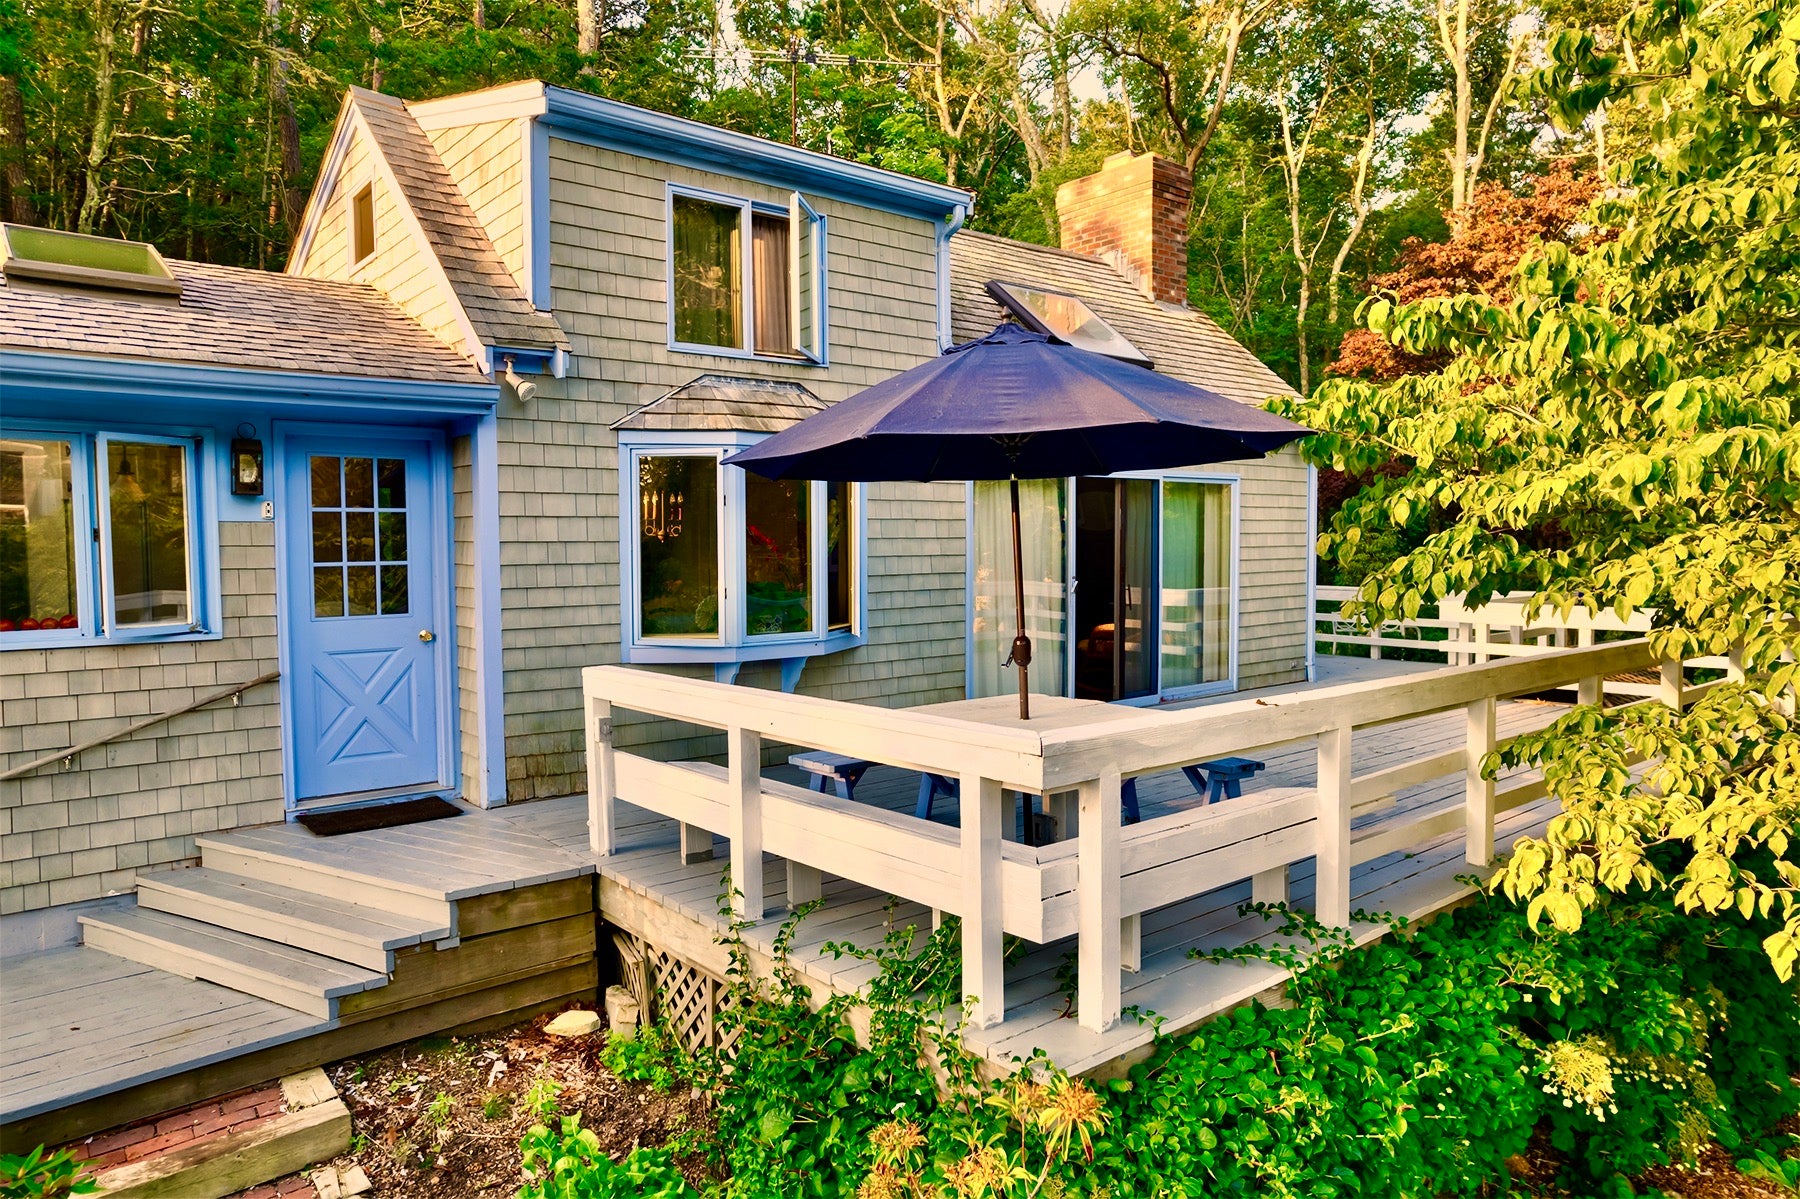 A home with cedar shake siding and robin's egg blue trim and front door.